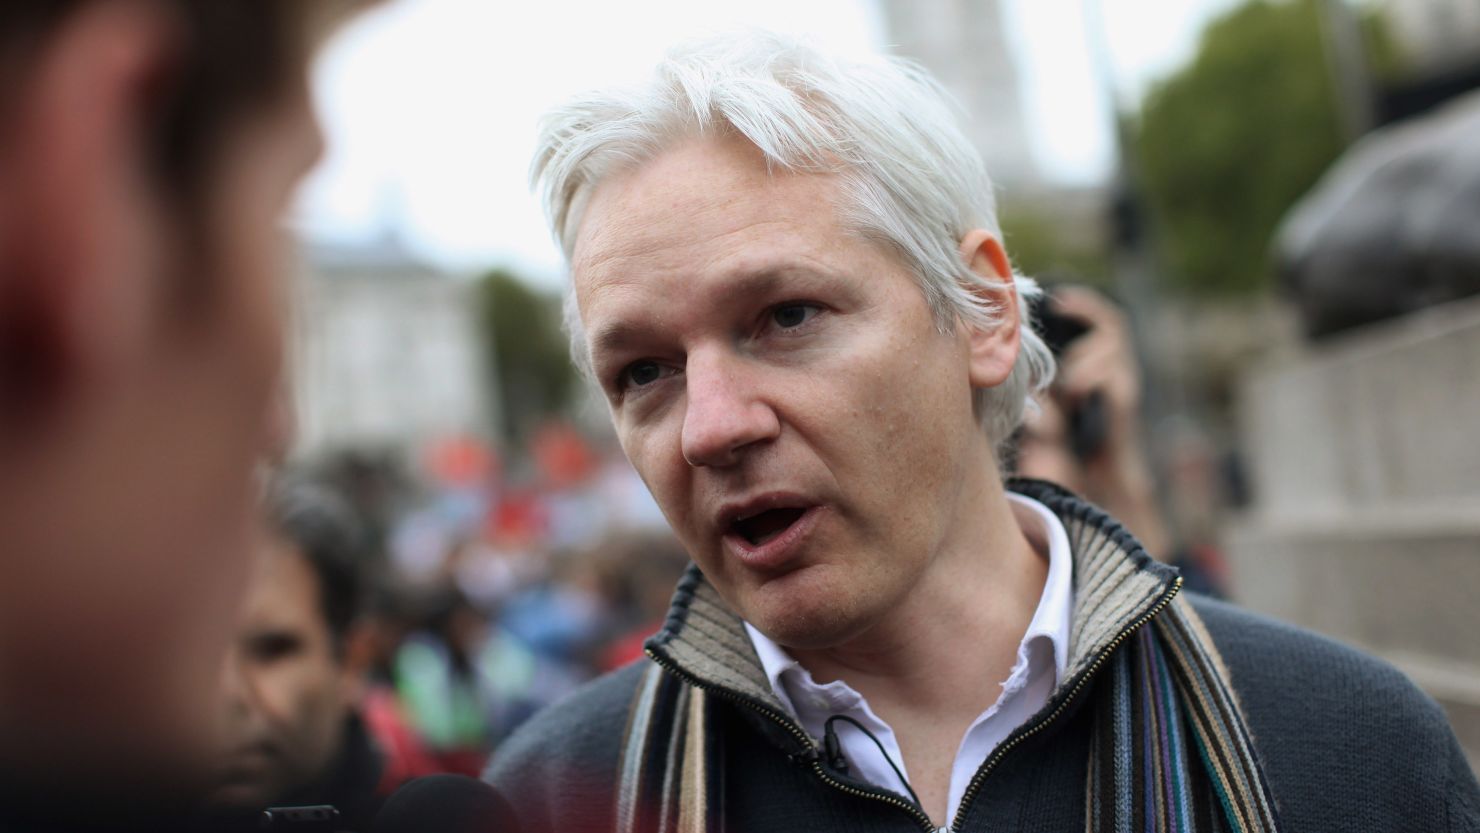 Julian Assange, founder of the WikiLeaks website, is expected to discover whether he will be extradited to Sweden this week.